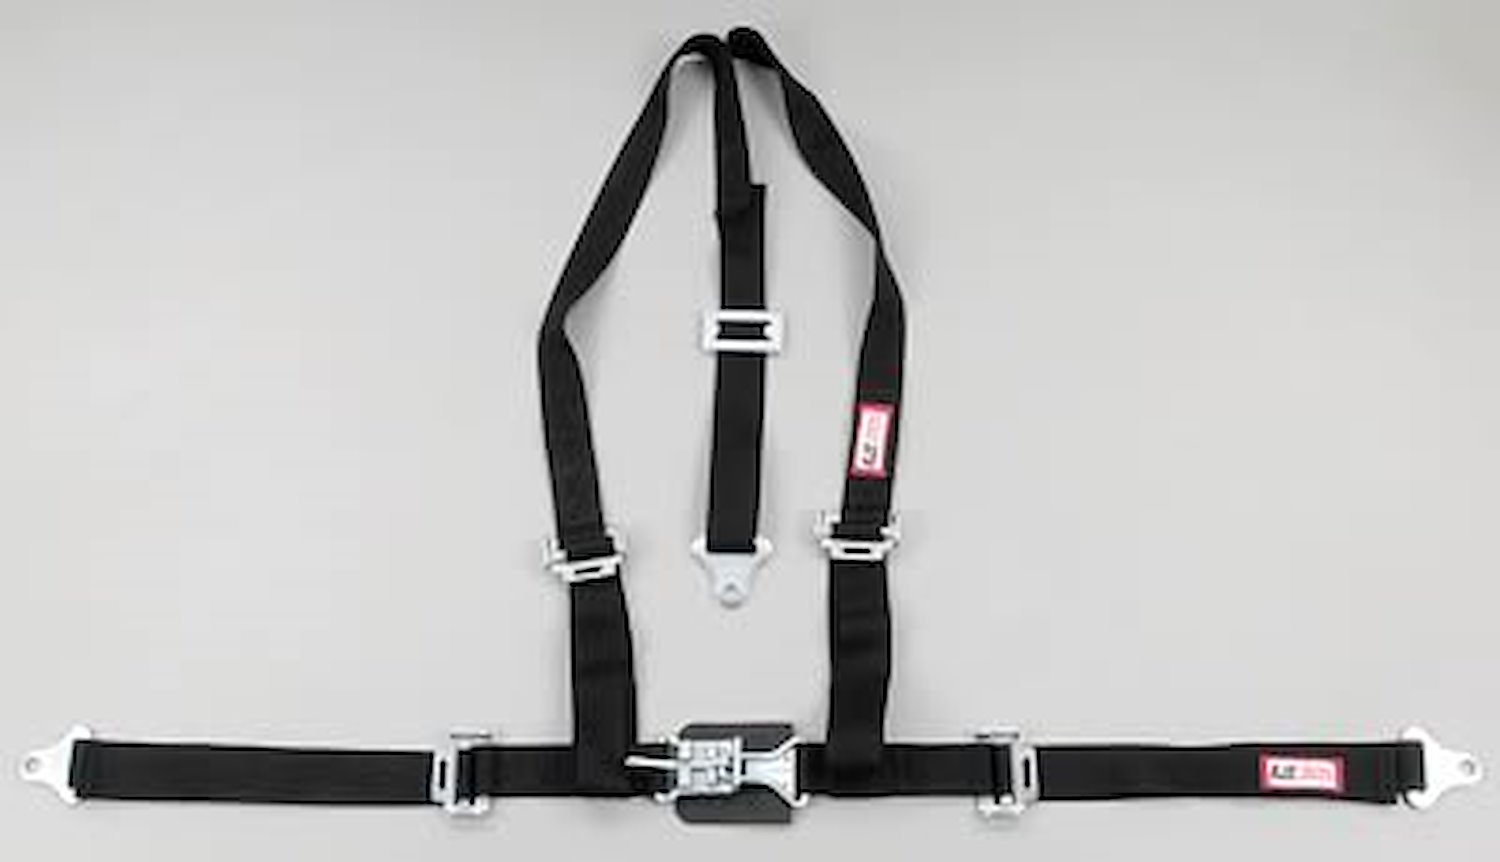 NON-SFI L&L HARNESS 2 PULL UP Lap Belt SNAP SEWN IN 2 S.H. INDIVIDUAL FLOOR Mount w/STERNUM STRAP WRAP/BOLT PURPLE